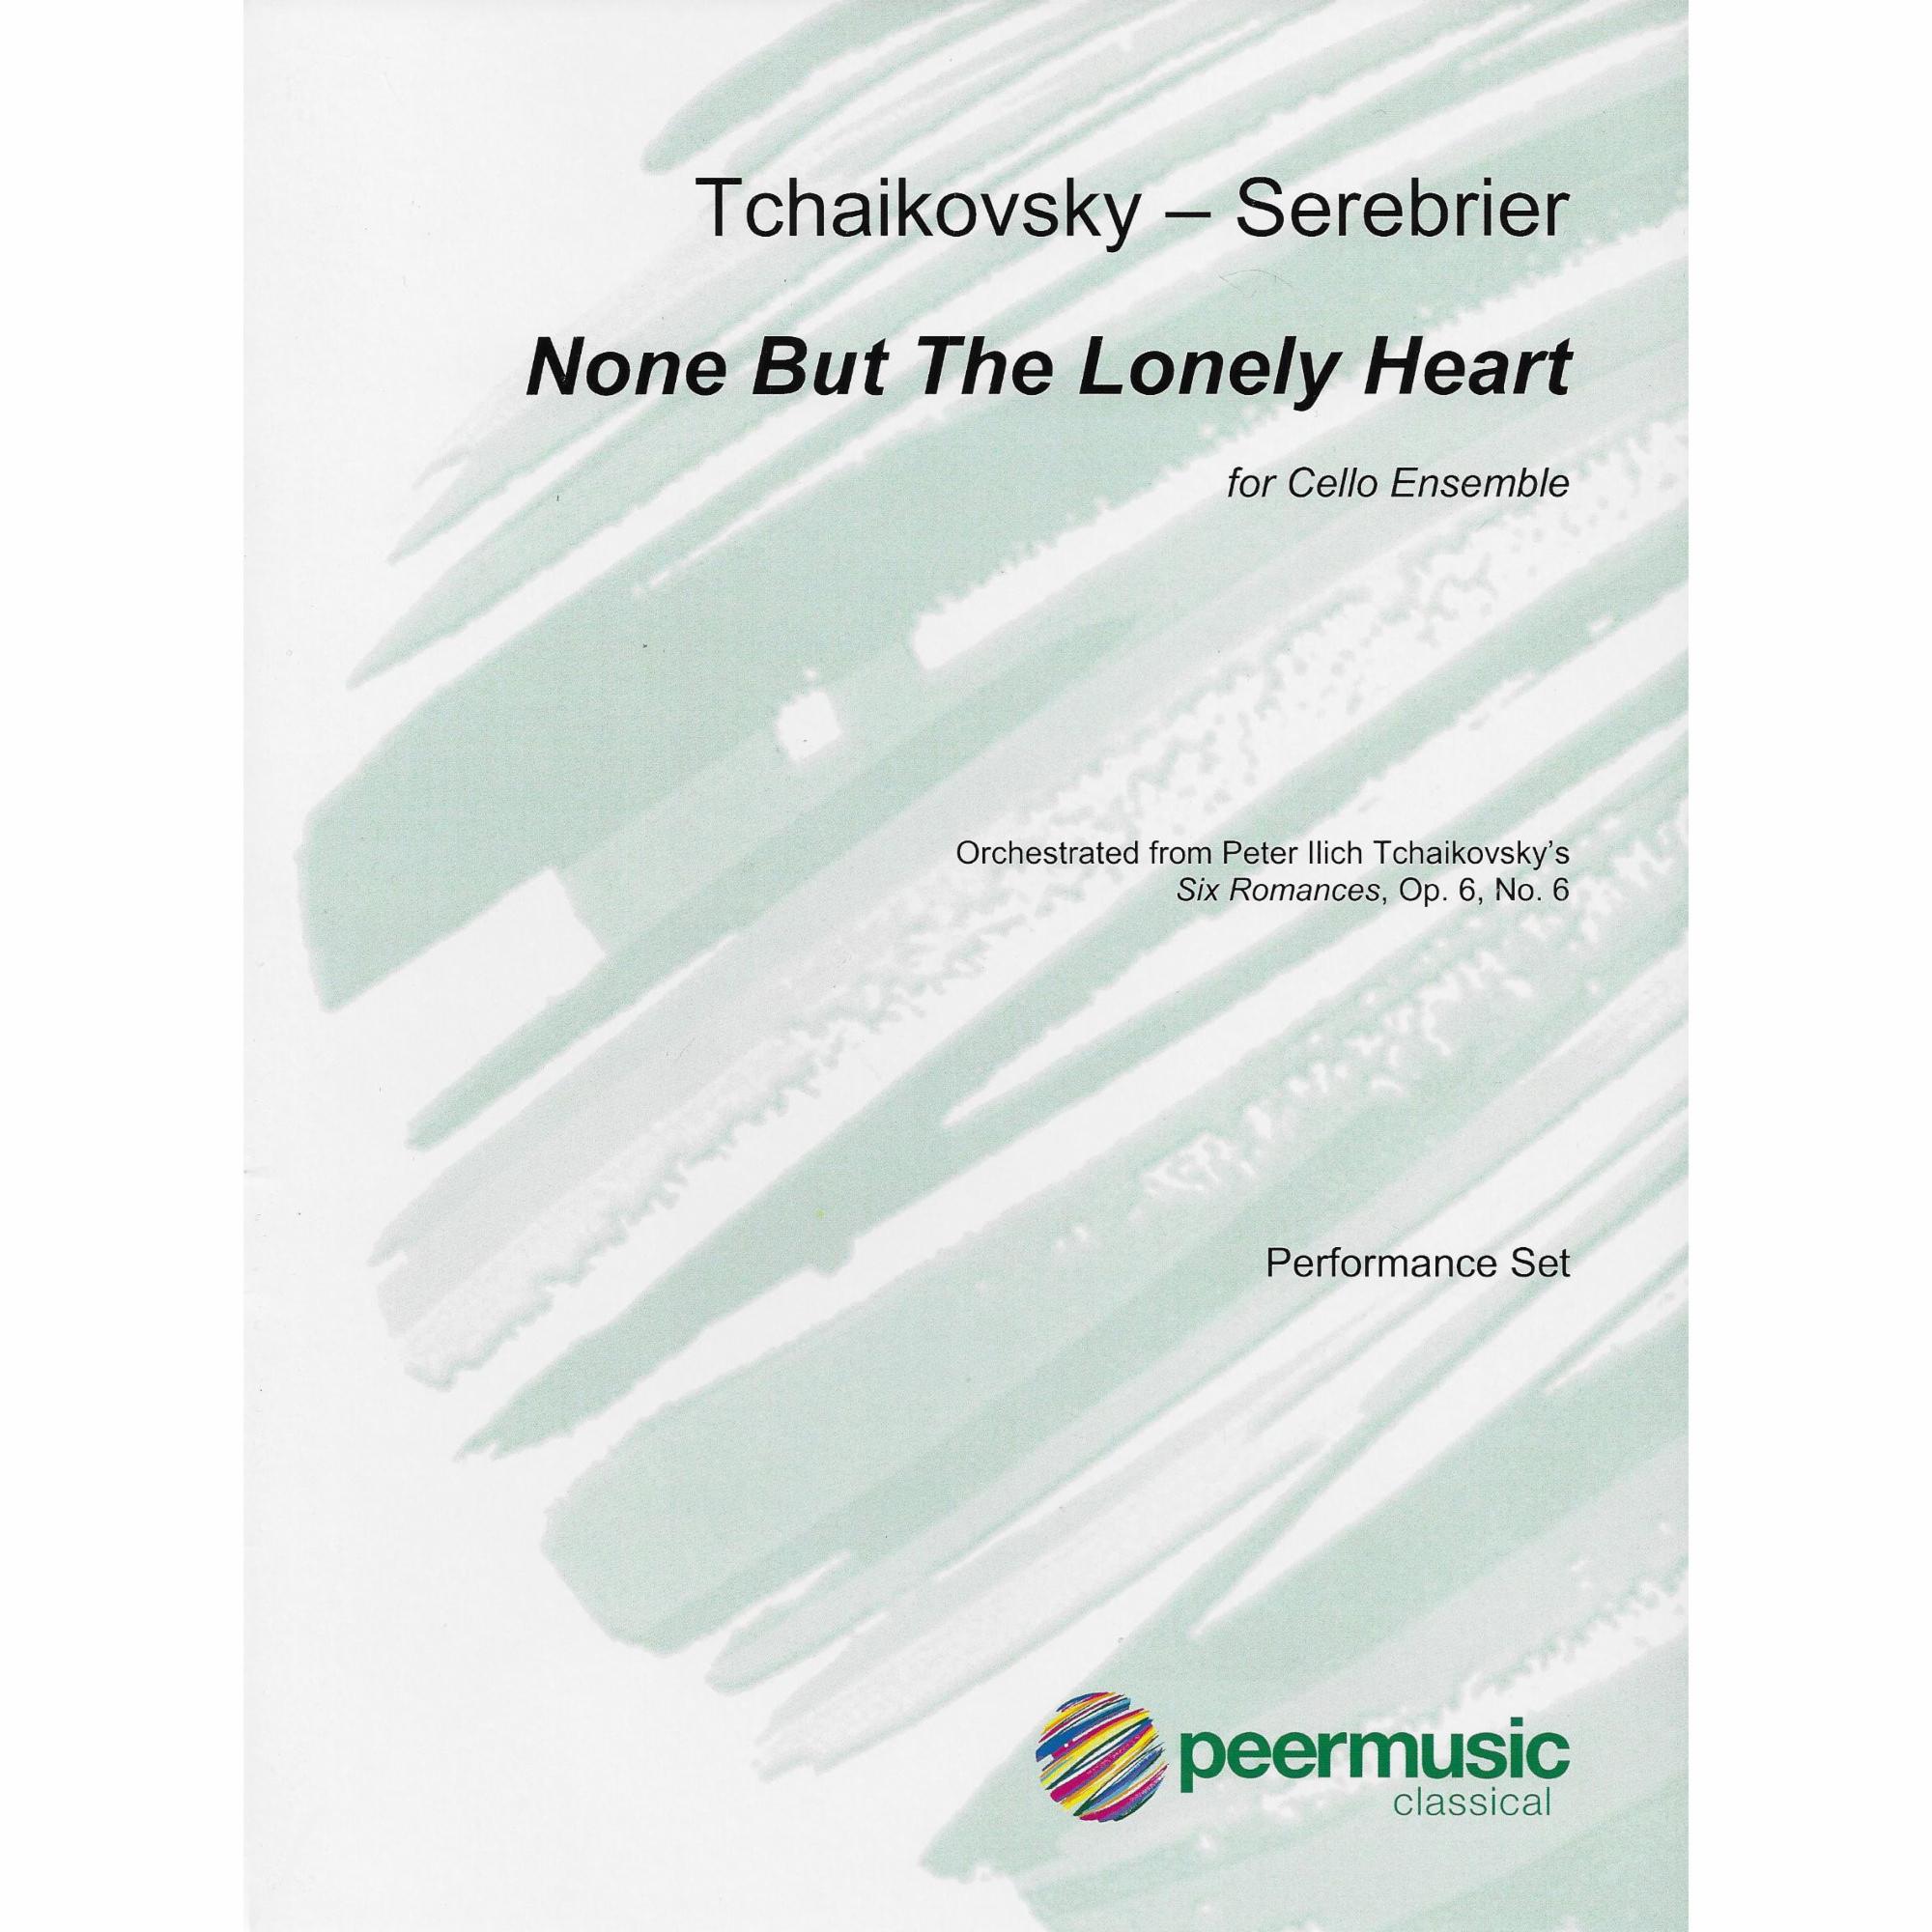 Tchaikovsky -- None But the Lonley Heart, Op. 6, No. 6 for Cello Octet